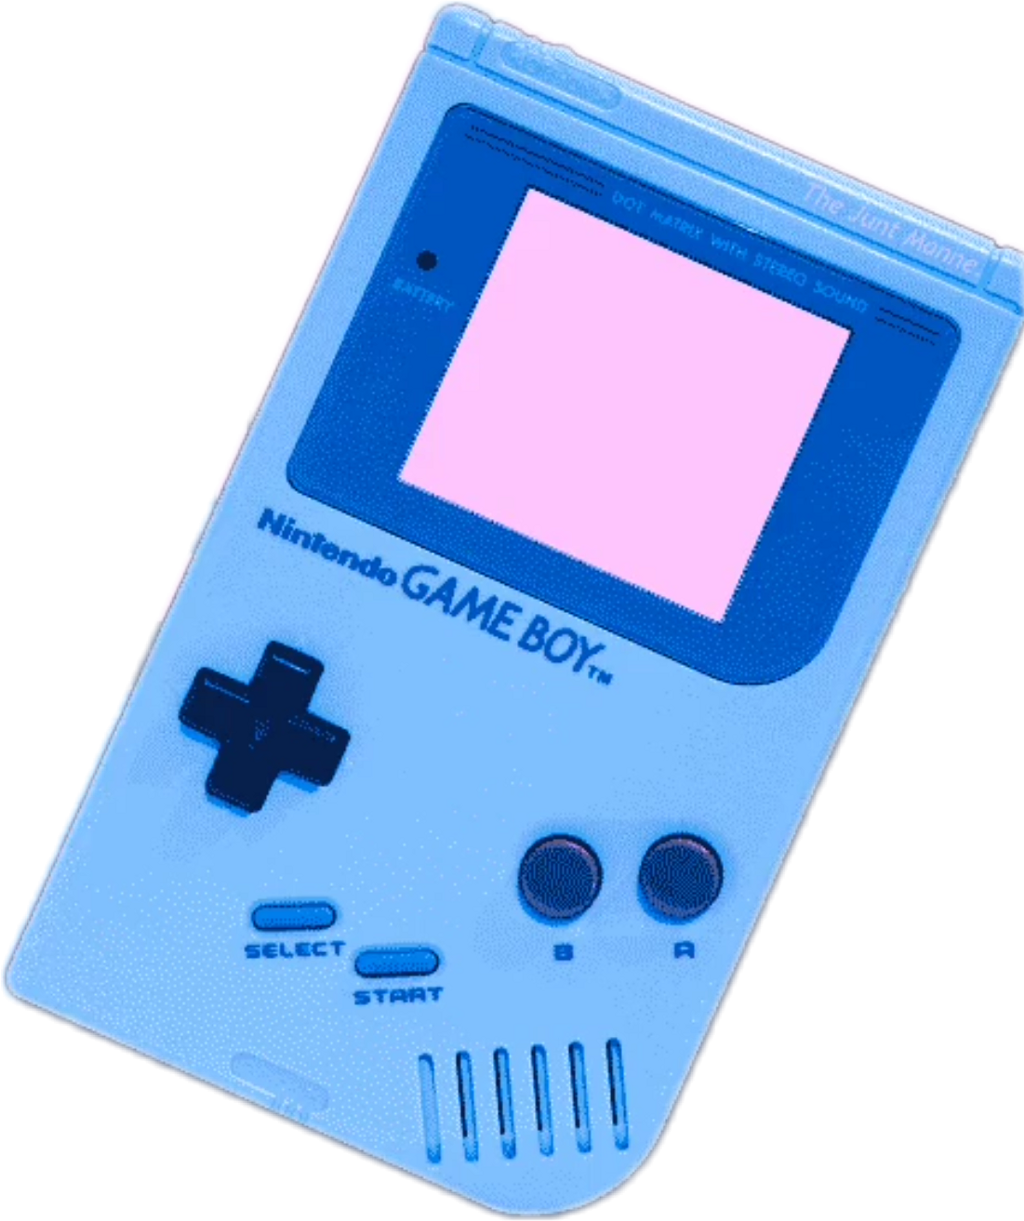 A Blue Handheld Game Console